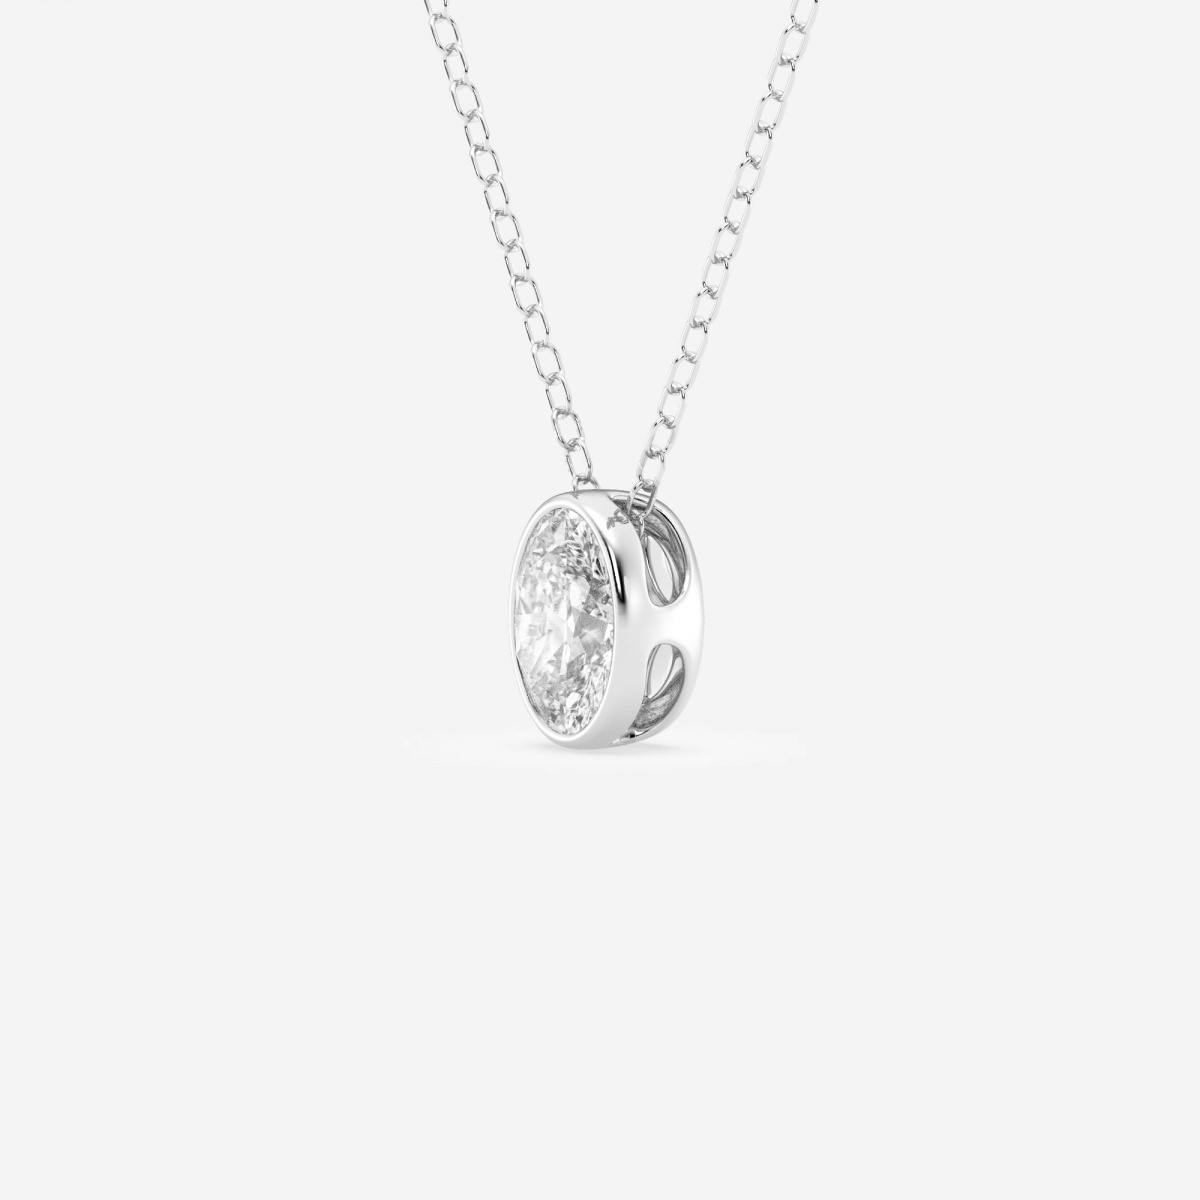 Additional Image 1 for  1/2 ctw Oval Lab Grown Diamond Bezel Set Solitaire Pendant with Adjustable Chain